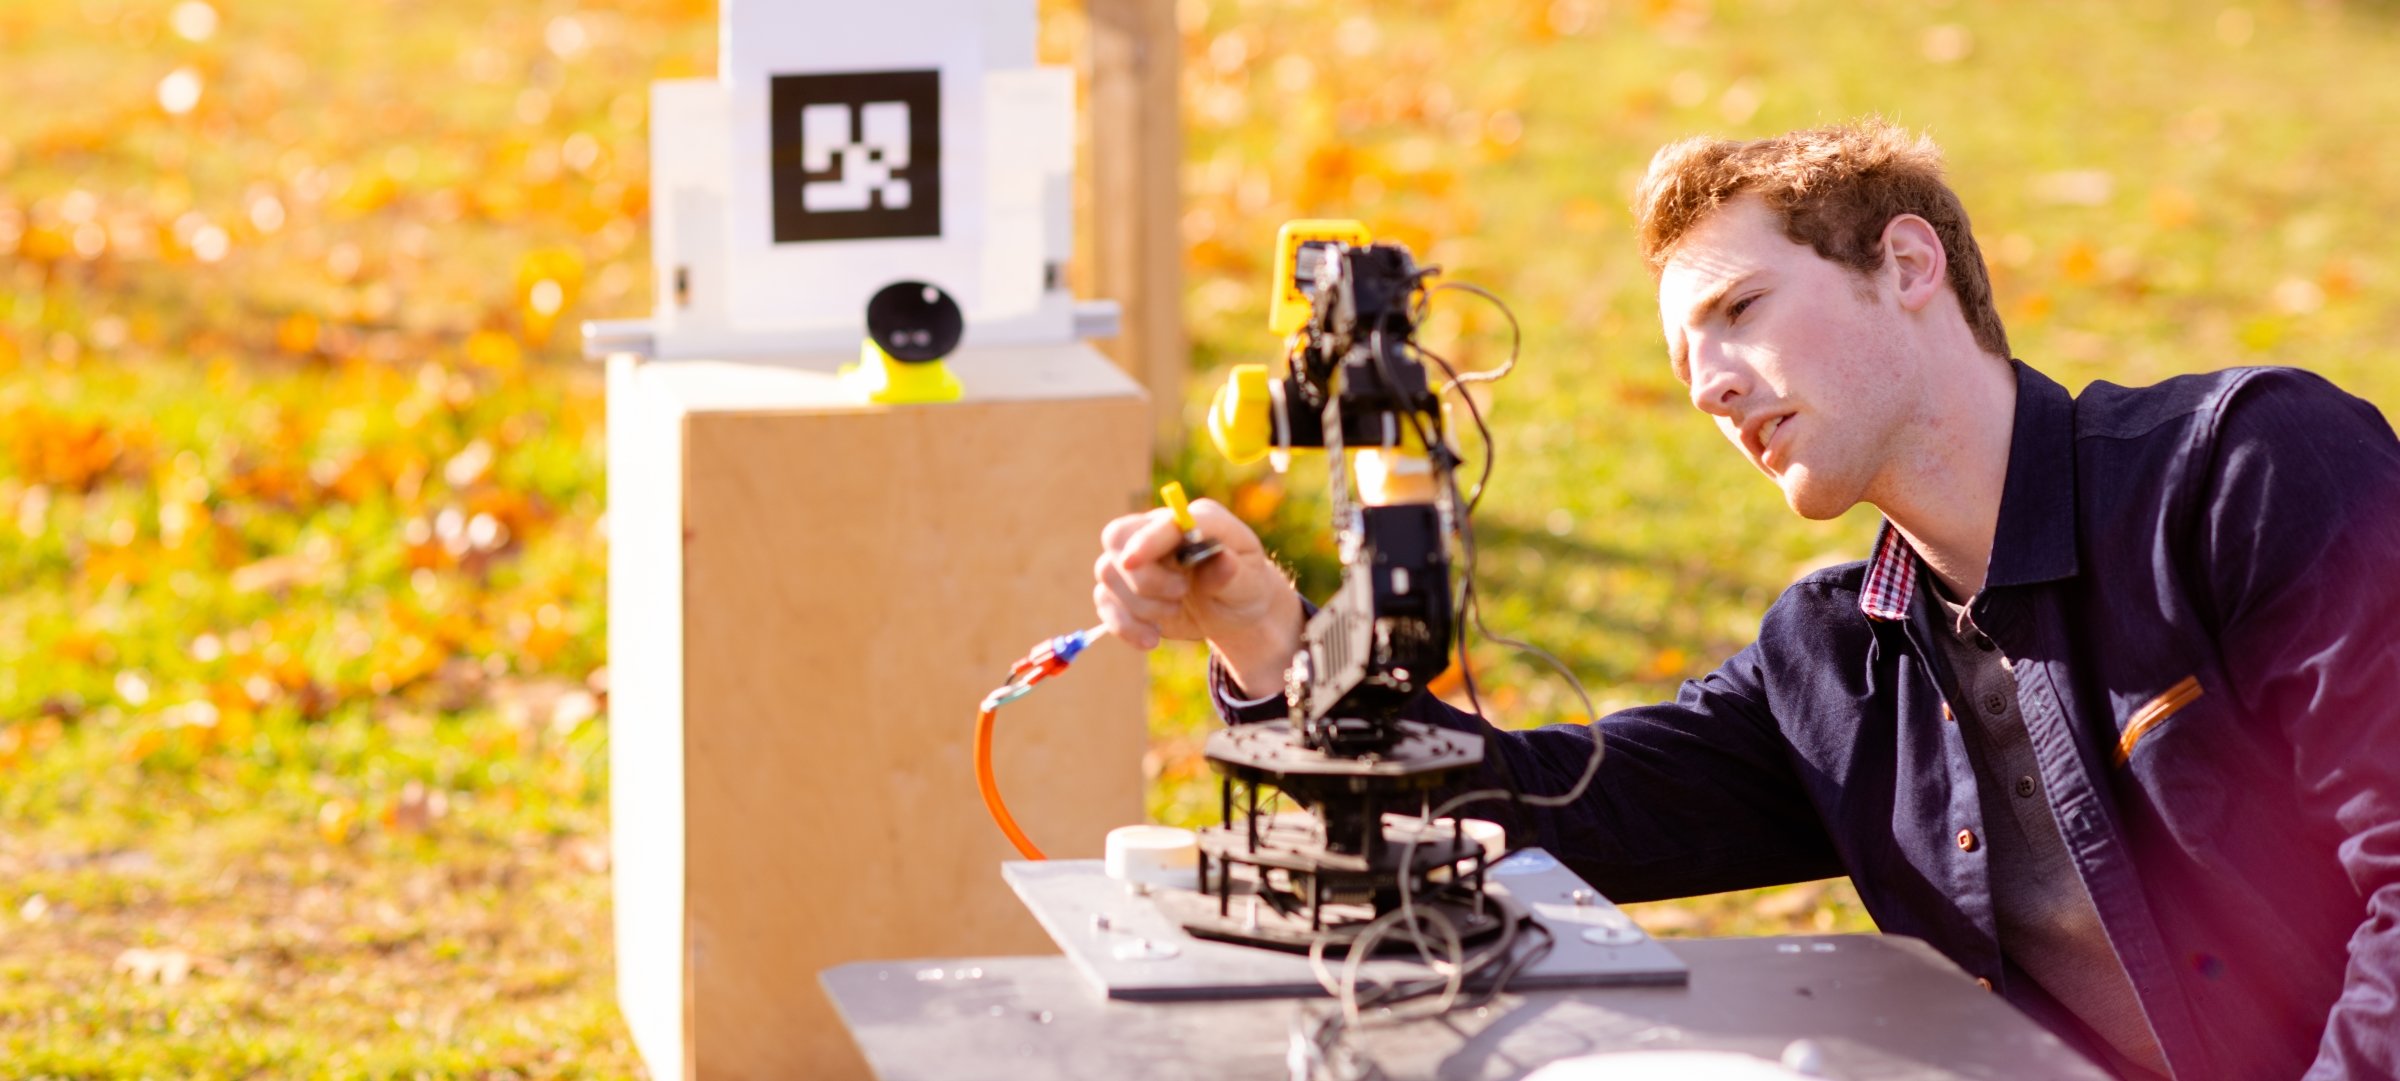 Student working on a robot in the field.